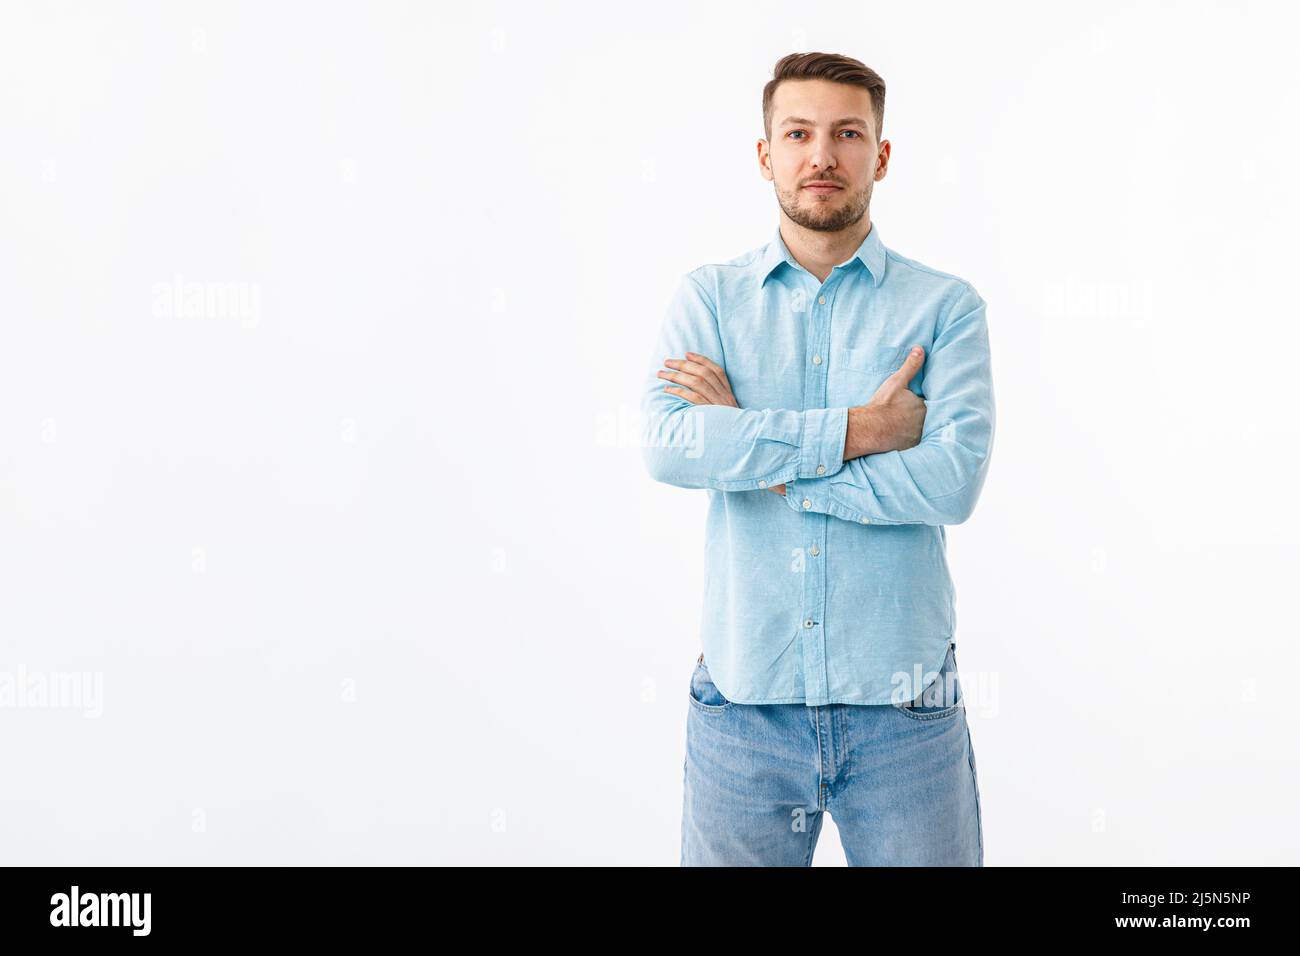 Portrait of a cheerful young man in a blue shirt on a white background. The guy stands, looks at the camera and smiles. Stock Photo